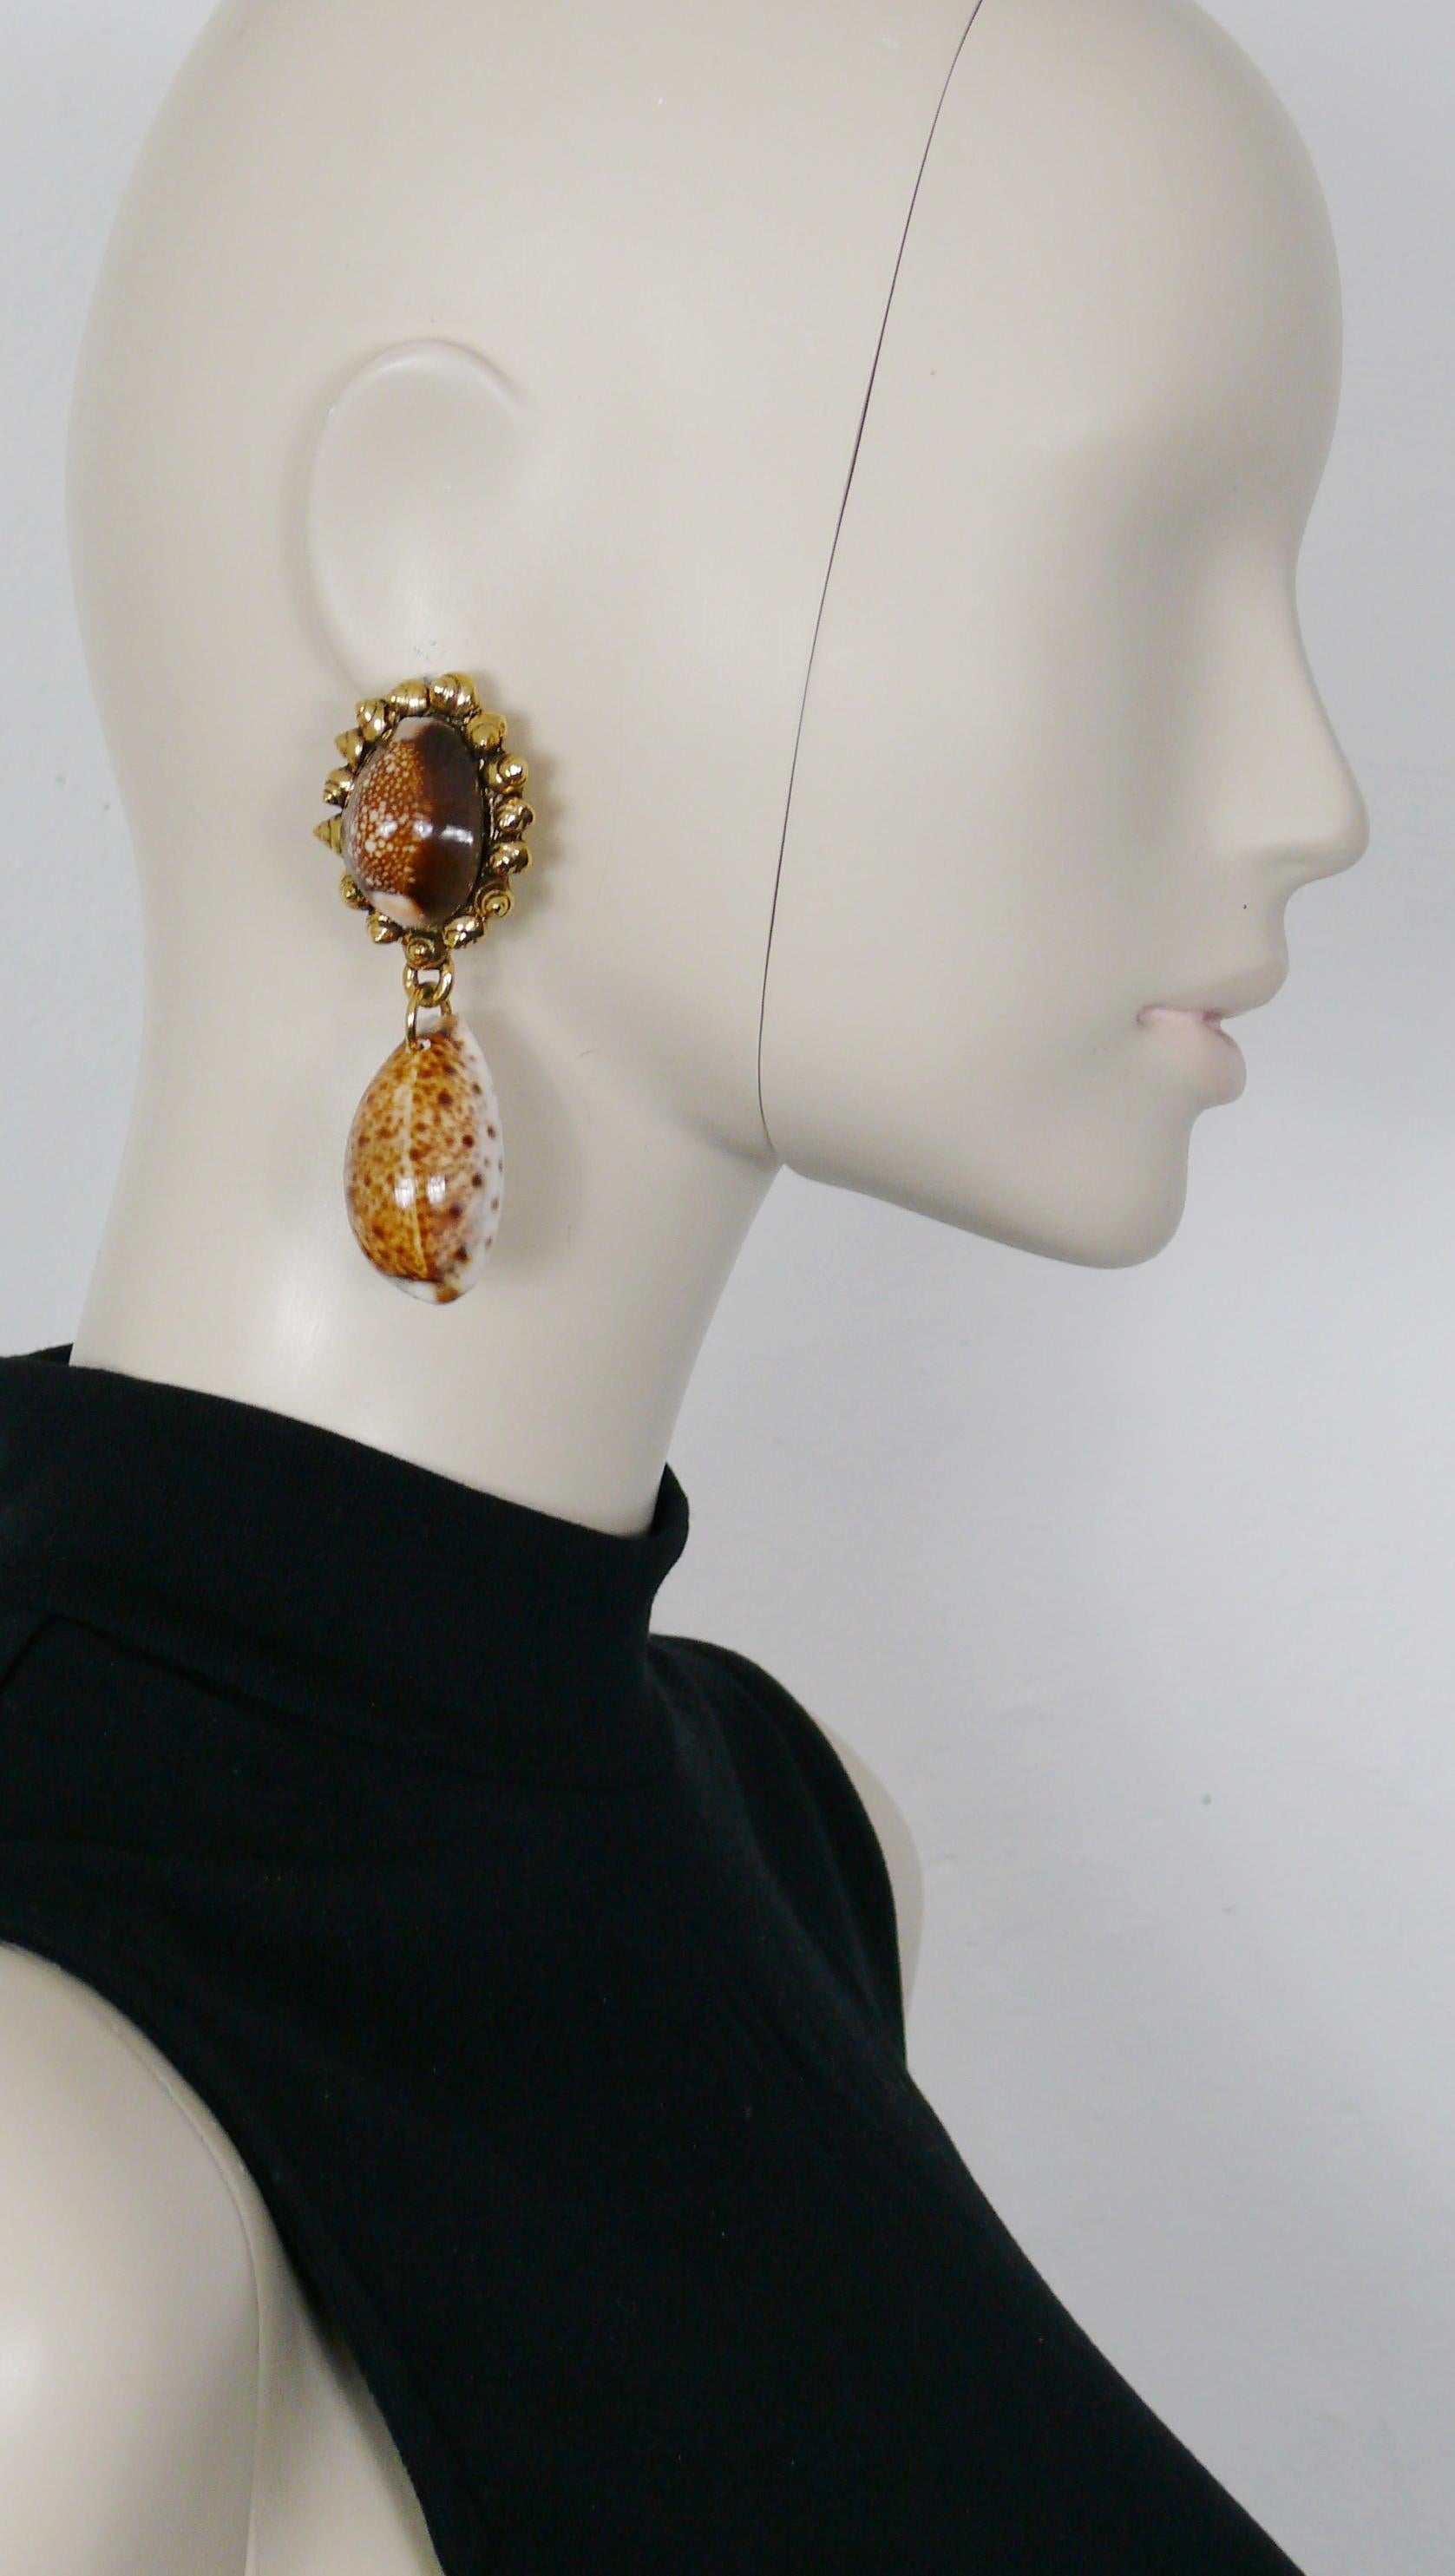 CHANTAL THOMASS vintage dangling earrings (clip-on) featuring seashells in a gold toned setting.

Embossed CHANTAL THOMASS.

Indicative measurements : max. height approx. 8.5 cm (3.35 inches) / max. width 3.3 cm (1.30 inches).

NOTES
- This is a